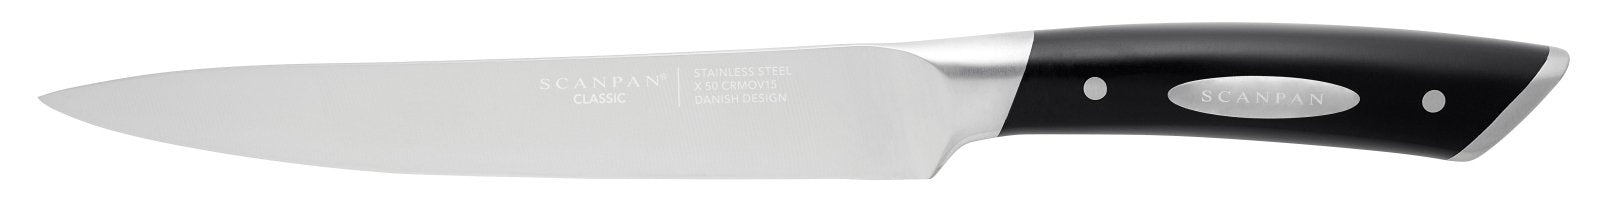 Scanpan Classic 20cm Carving Knife - SP92402000 - The Cotswold Knife Company